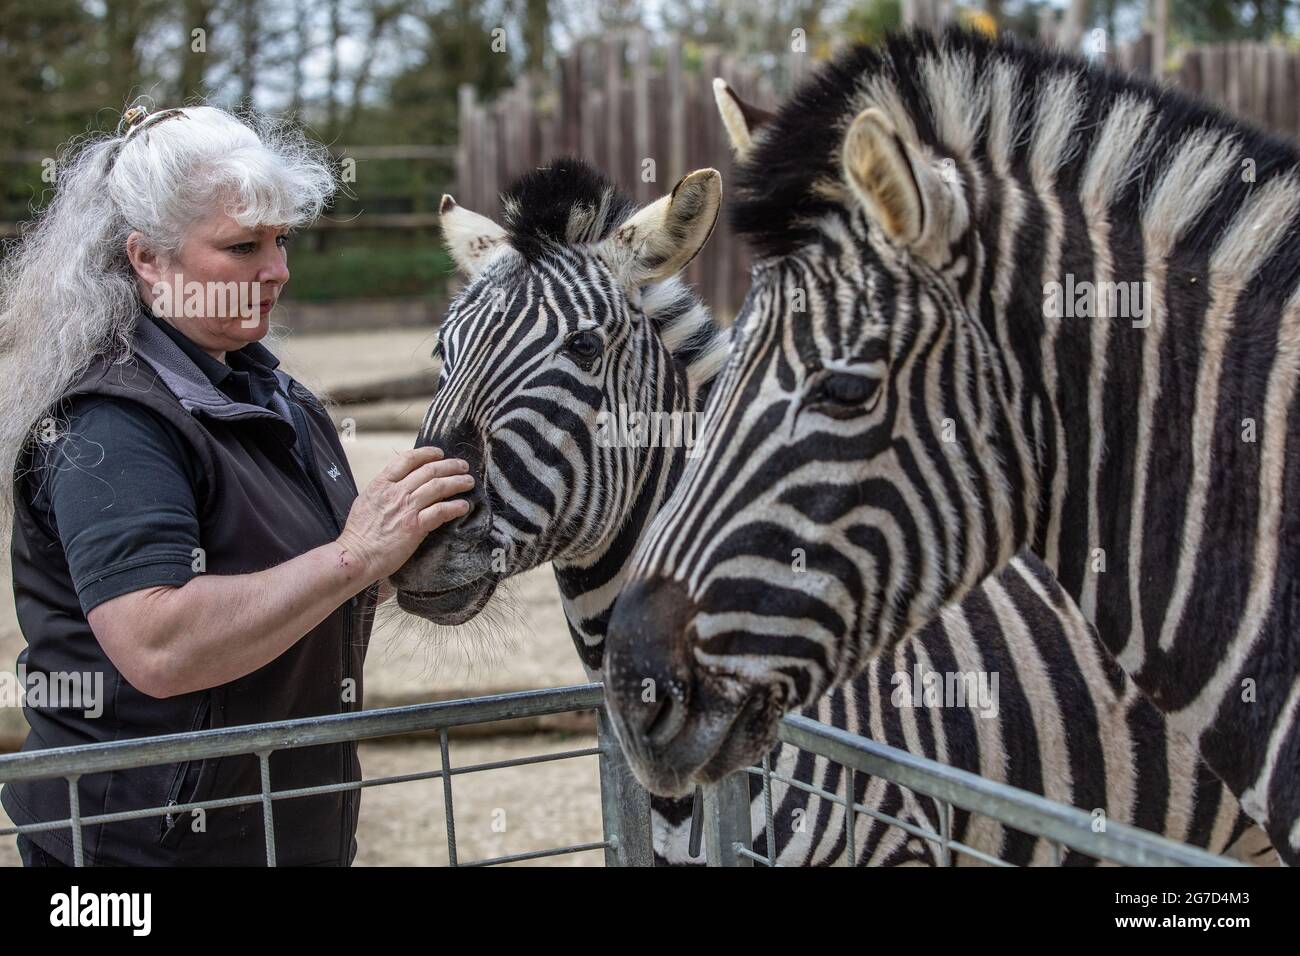 Brabrara Marquez, Head of Ungulates at  'Amazing Animals with Zebras featured in many commercials including ‘Investec’ adverts, Chipping Norton, UK Stock Photo